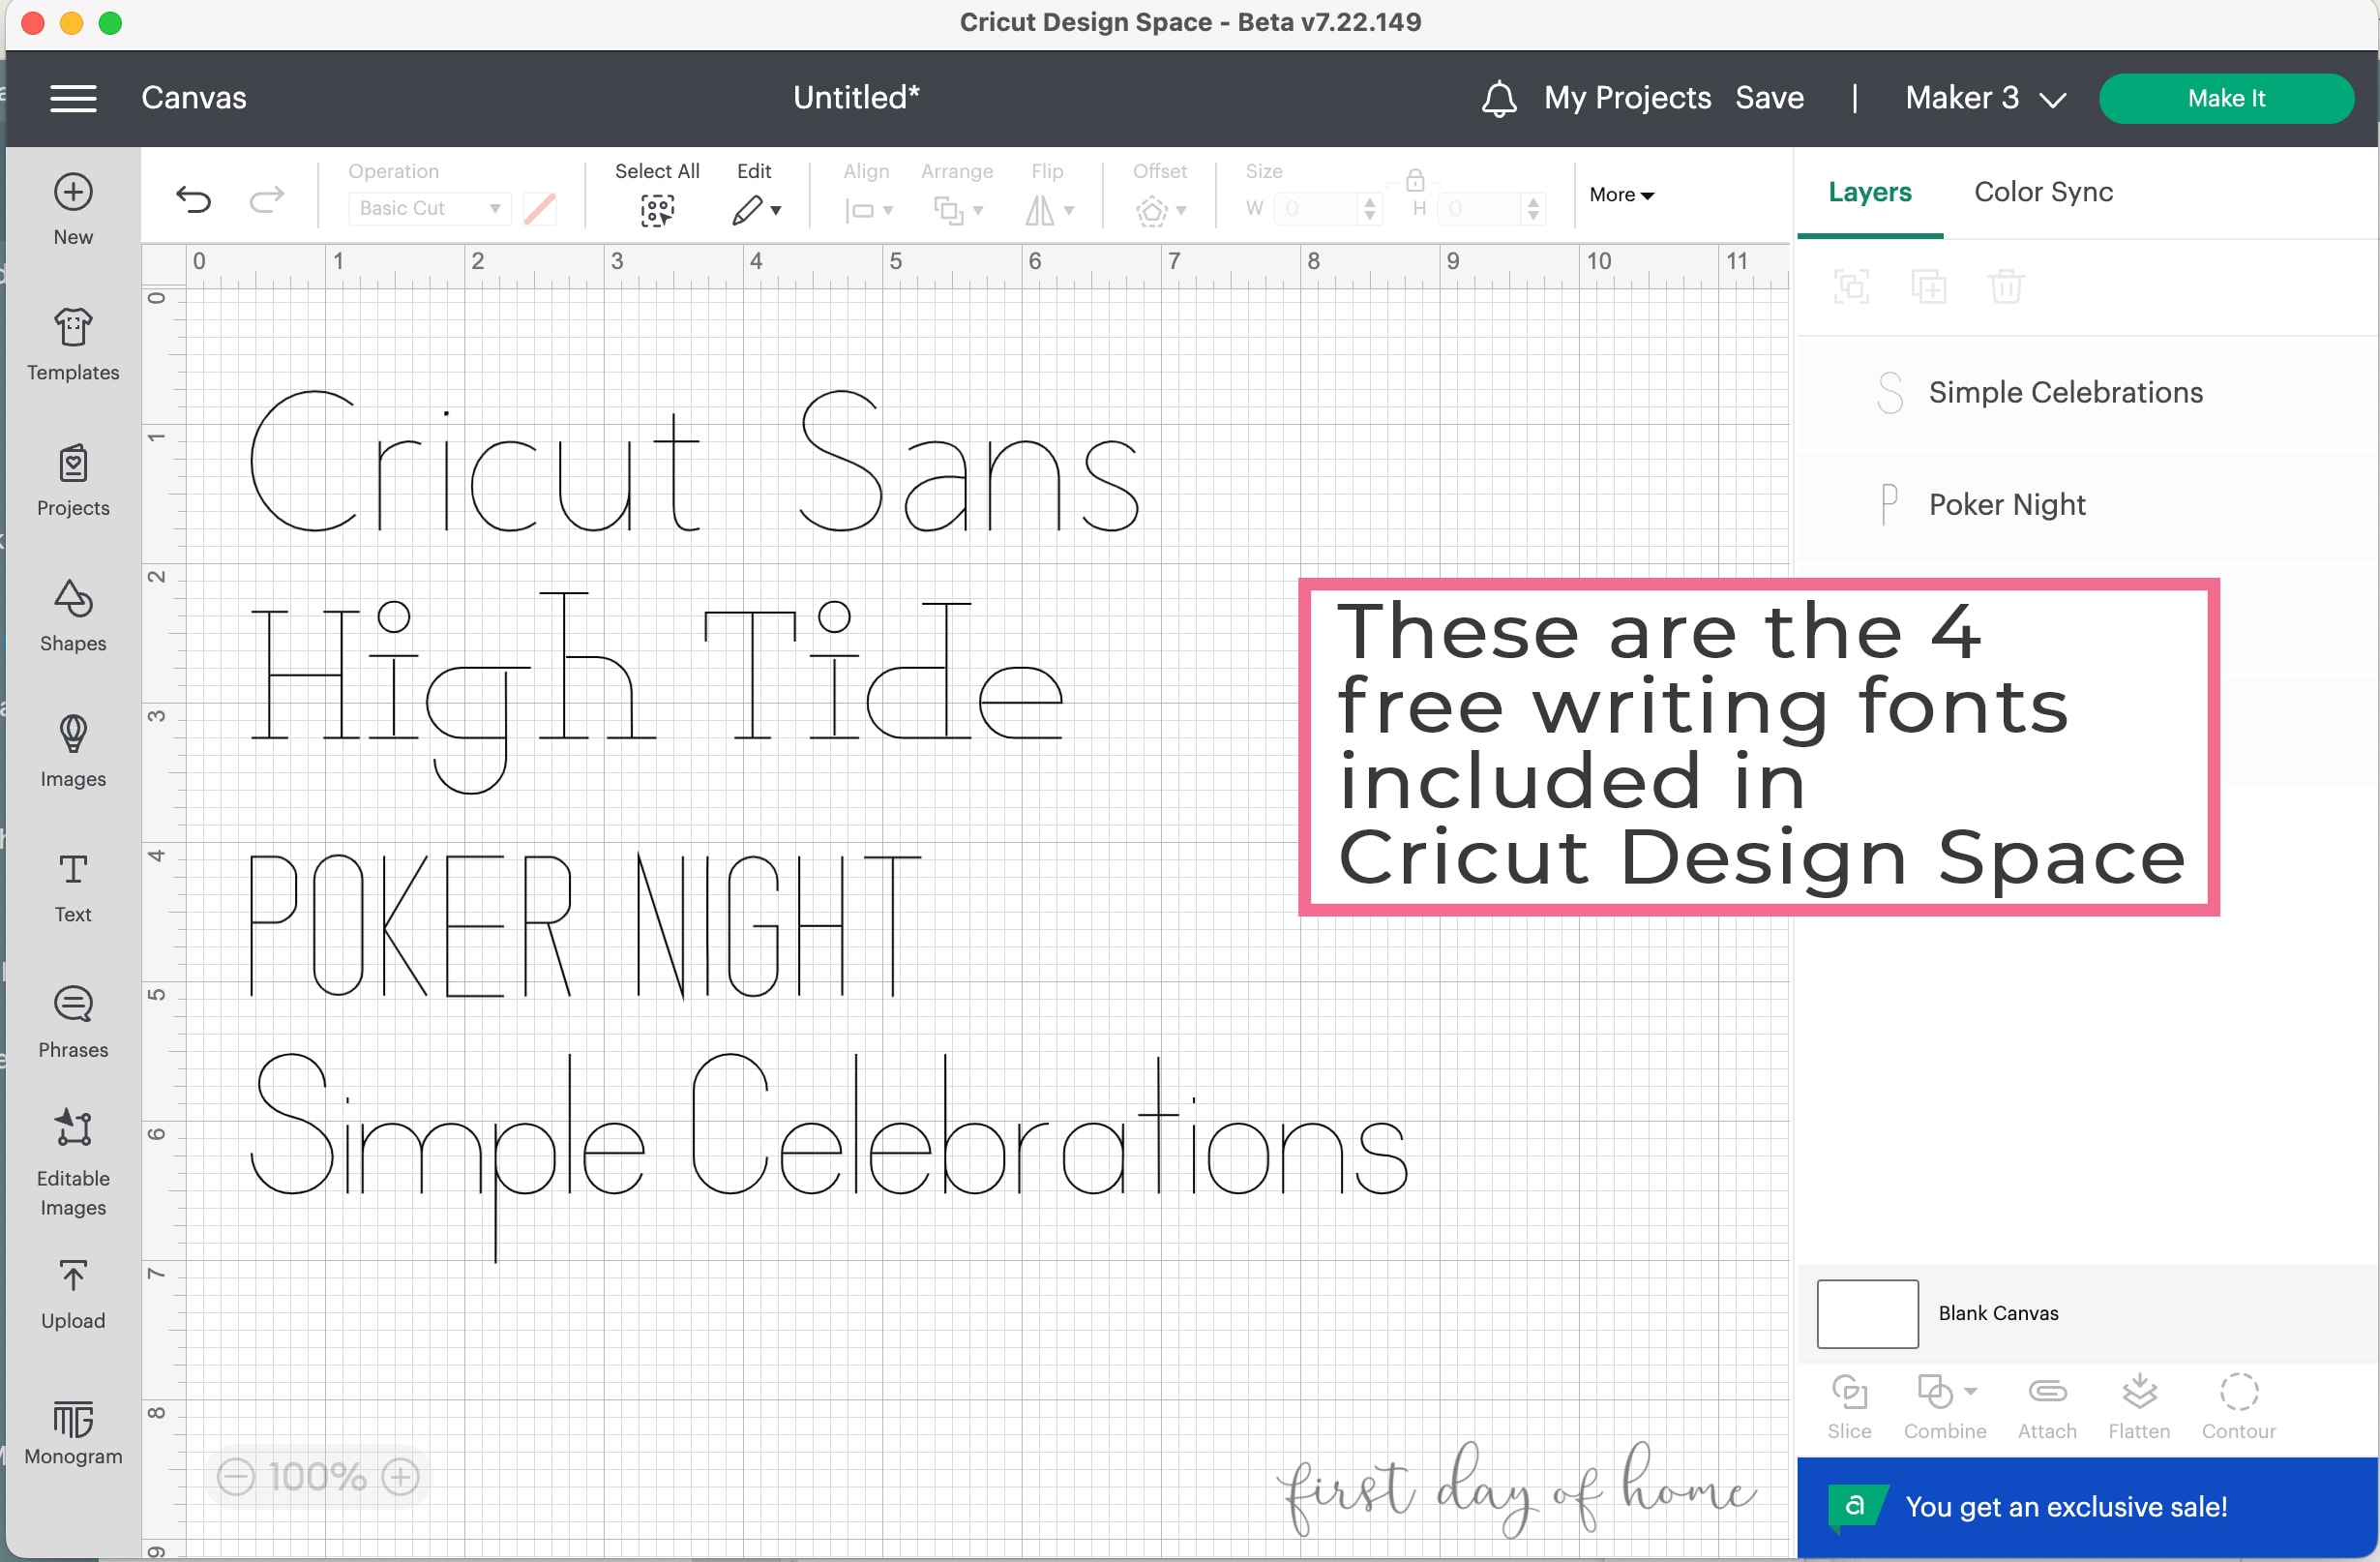 Examples of the four free writing fonts for Cricut included in Cricut Design Space